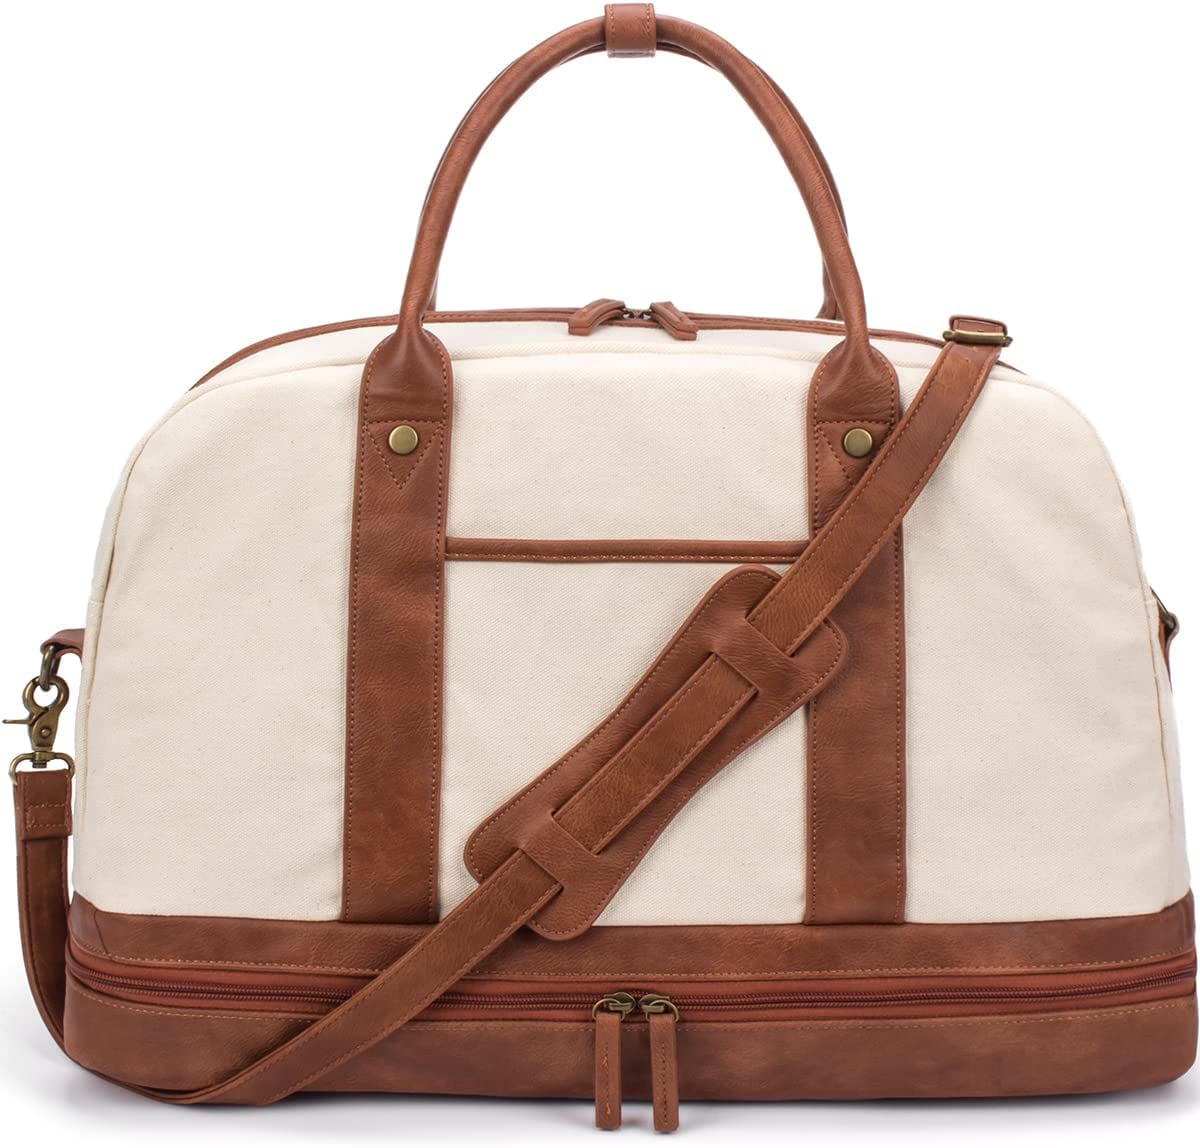 Best Personal-Item Carry-On Bags For Flying 2023